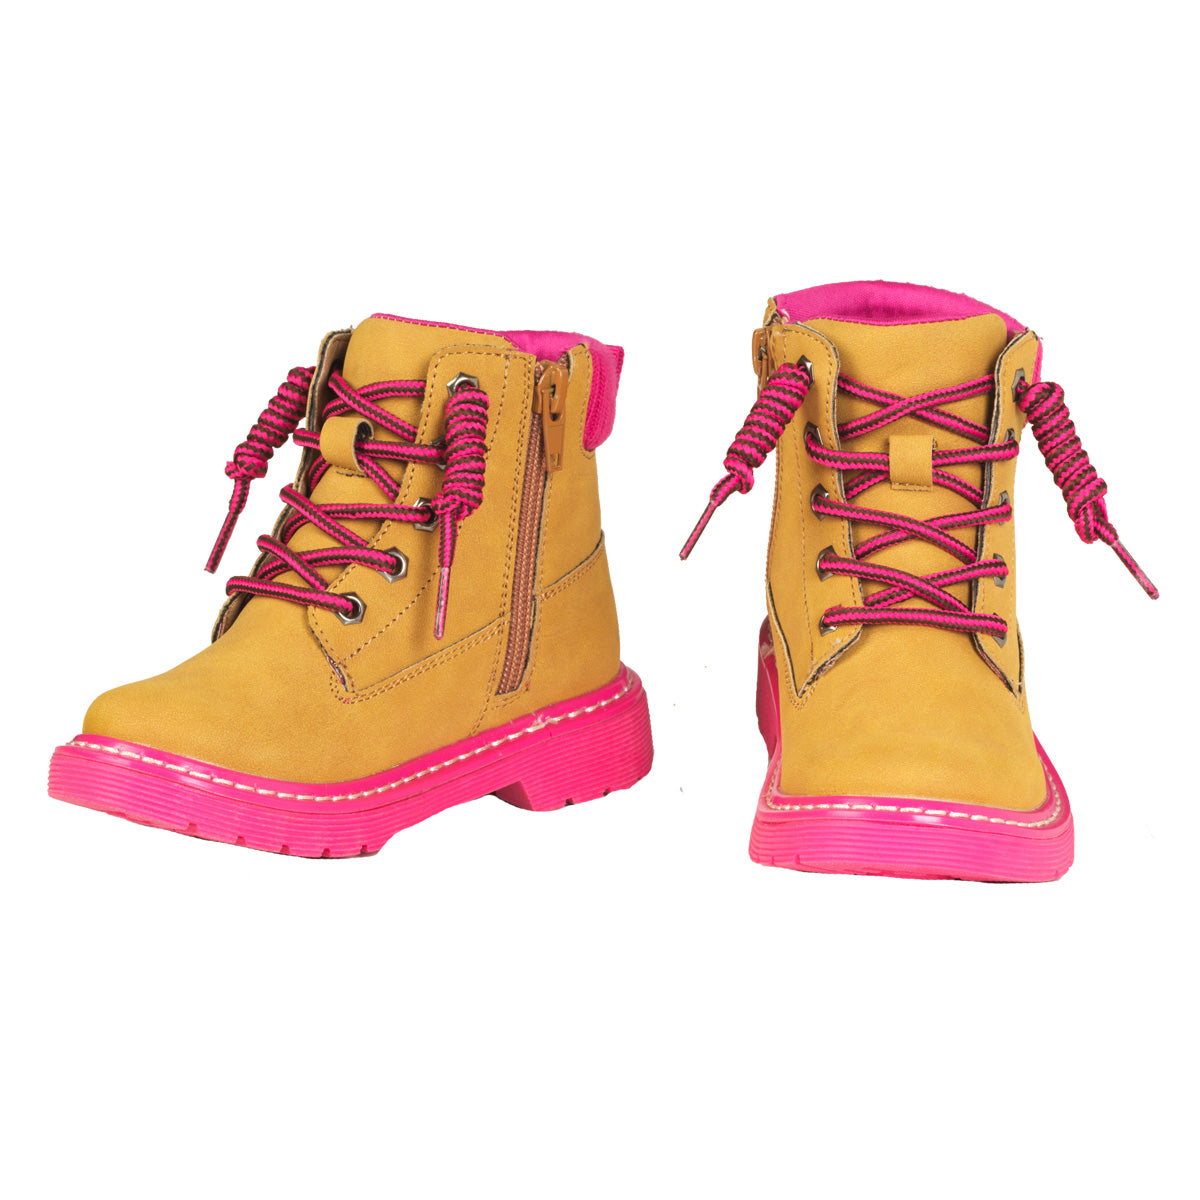 Girl's Twister 'Delaney' Casual Boots